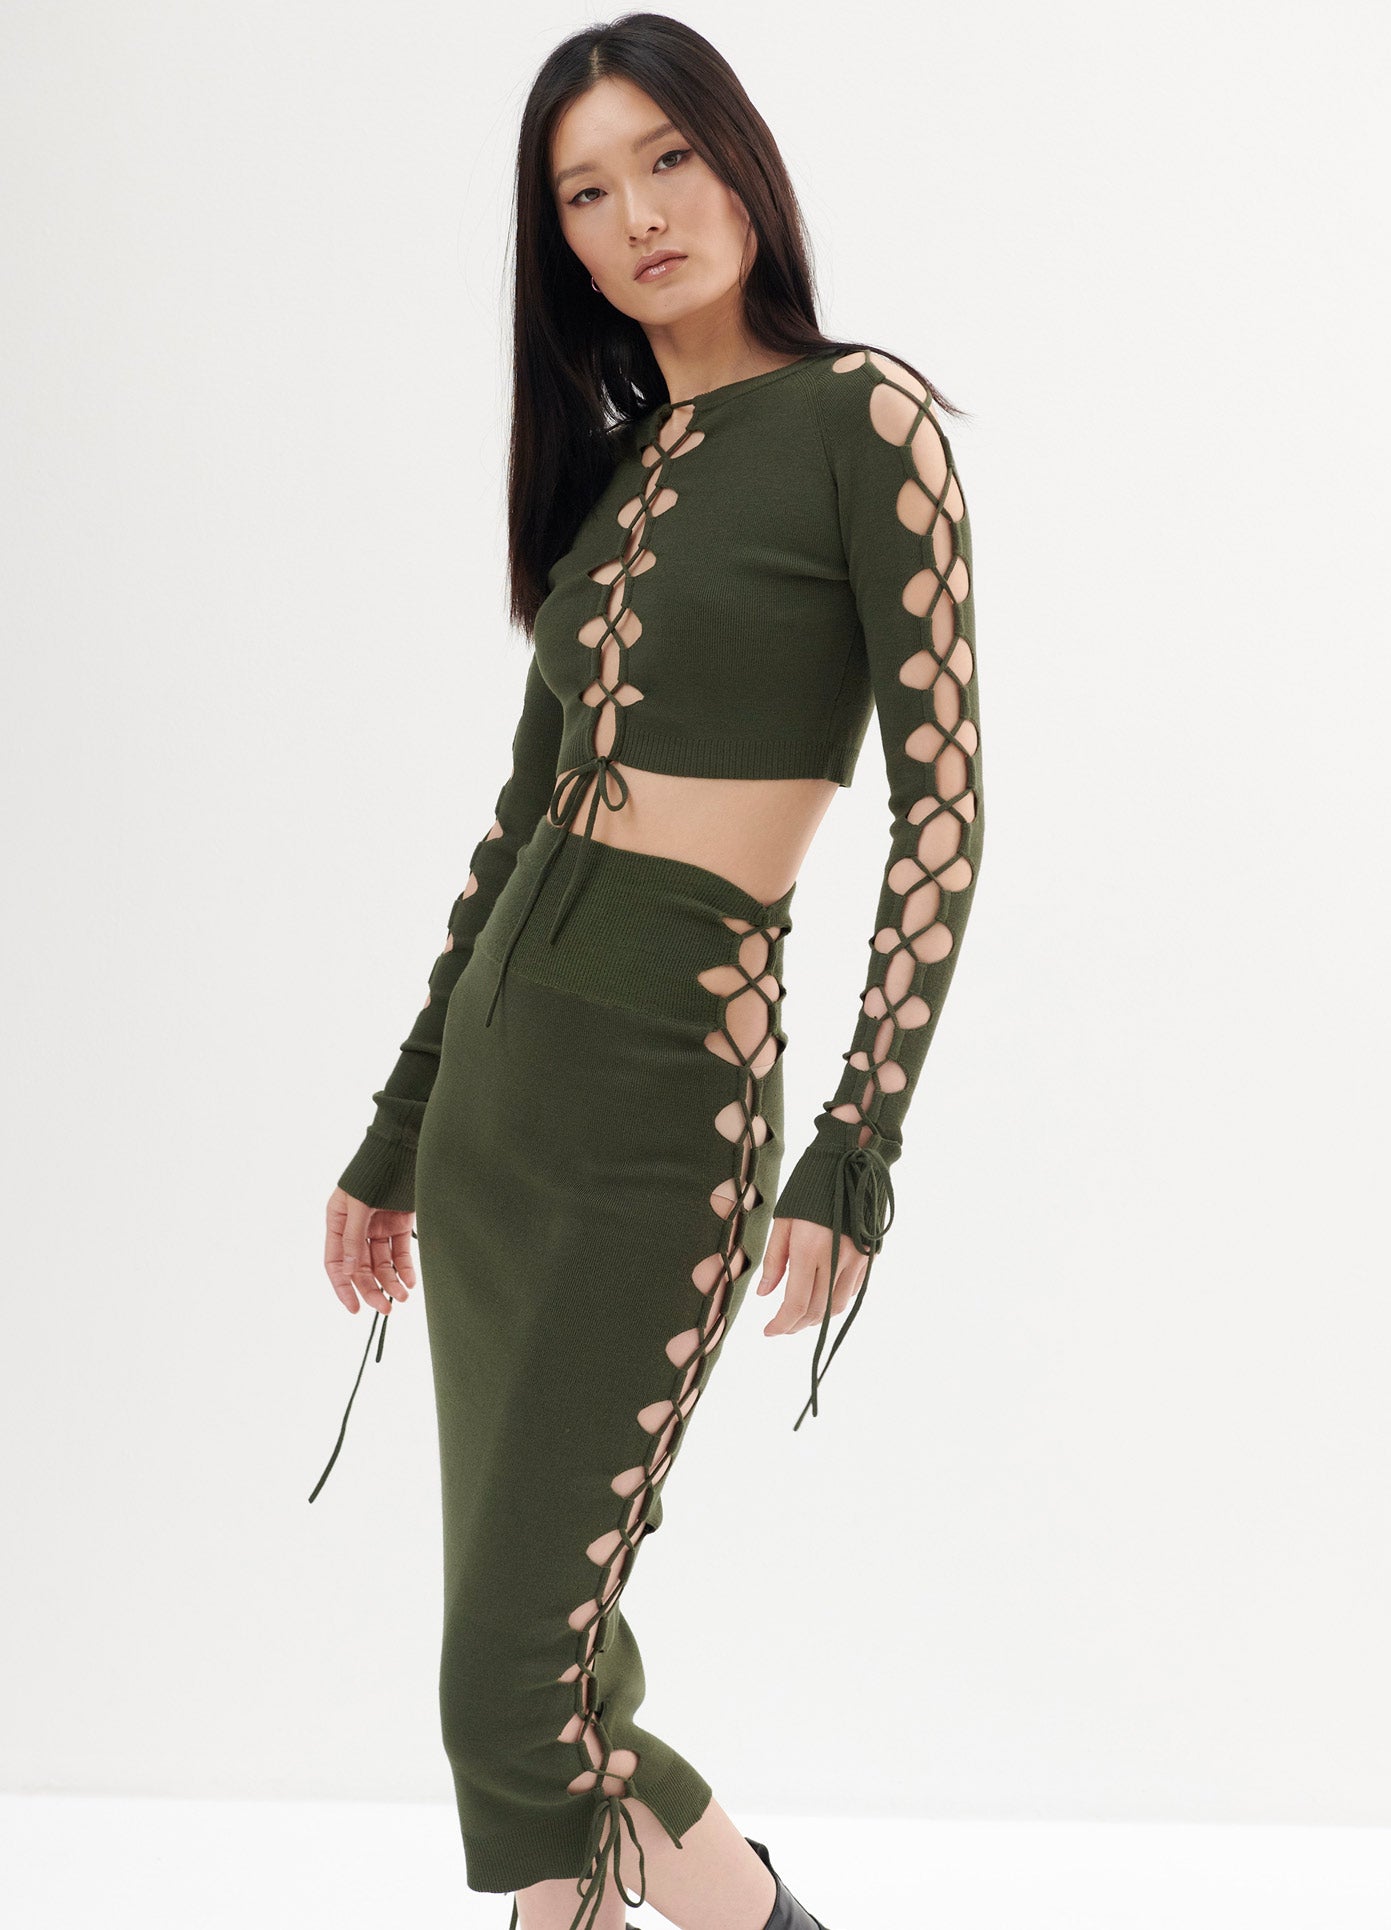 MONSE Lacing Knitted Skirt in Olive on Model Side View Main